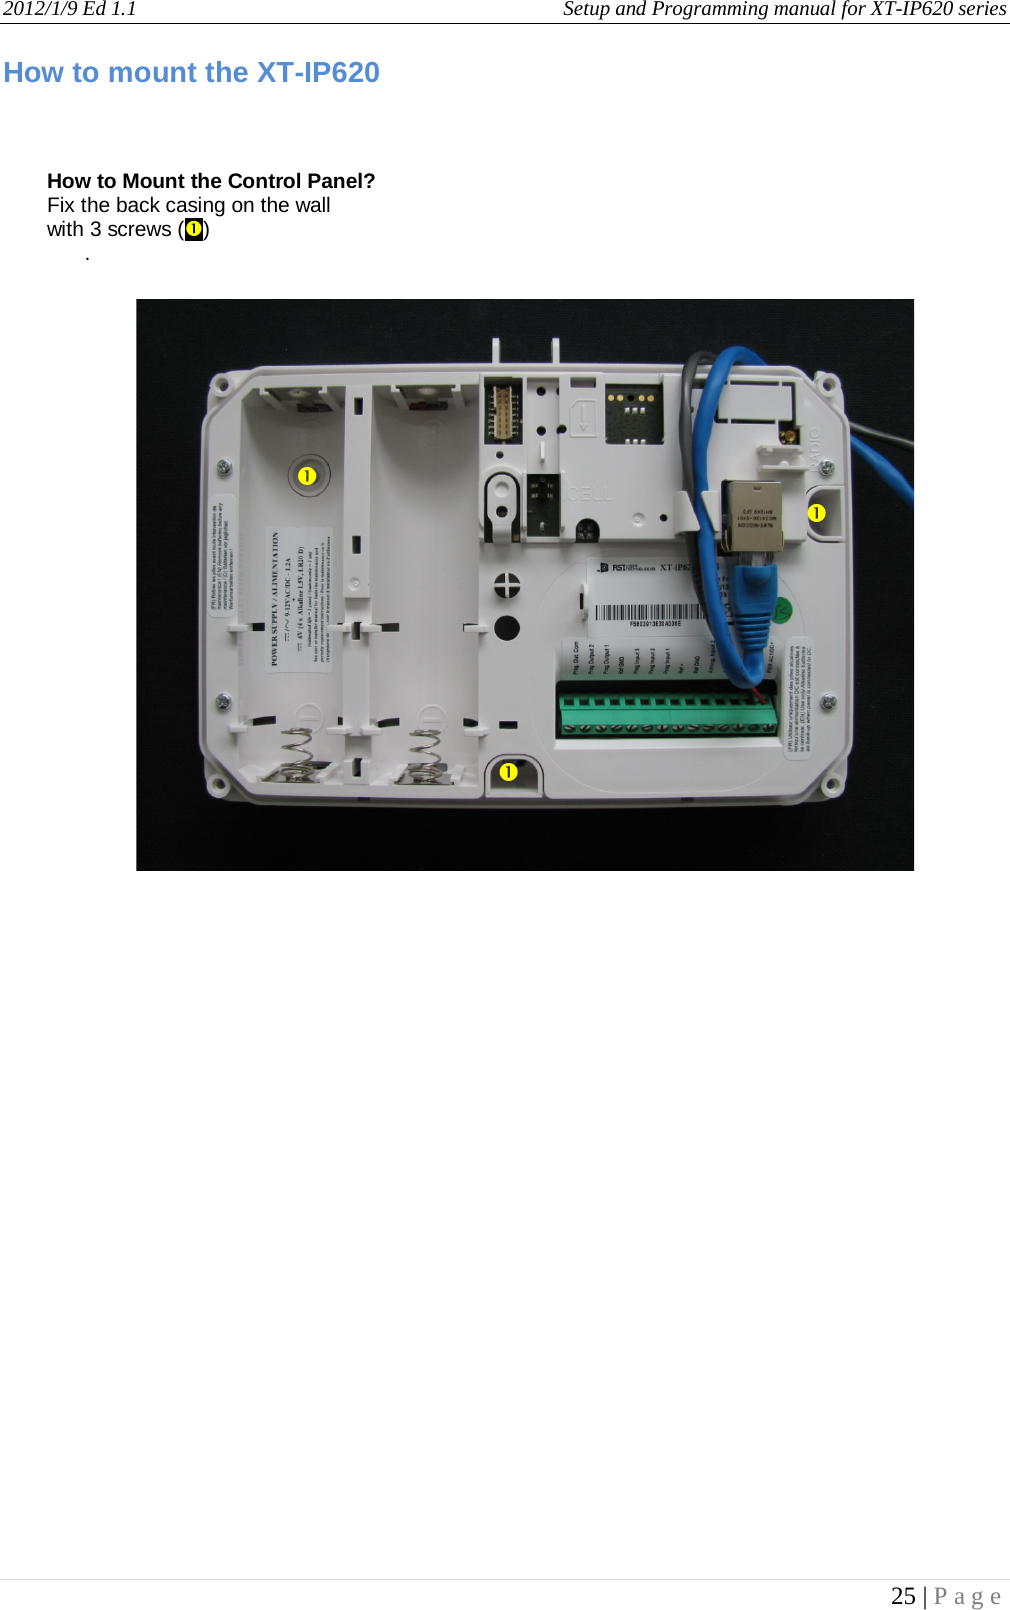 2012/1/9 Ed 1.1     Setup and Programming manual for XT-IP620 series   25 | Page  How to mount the XT-IP620                                 How to Mount the Control Panel? Fix the back casing on the wall  with 3 screws () .      